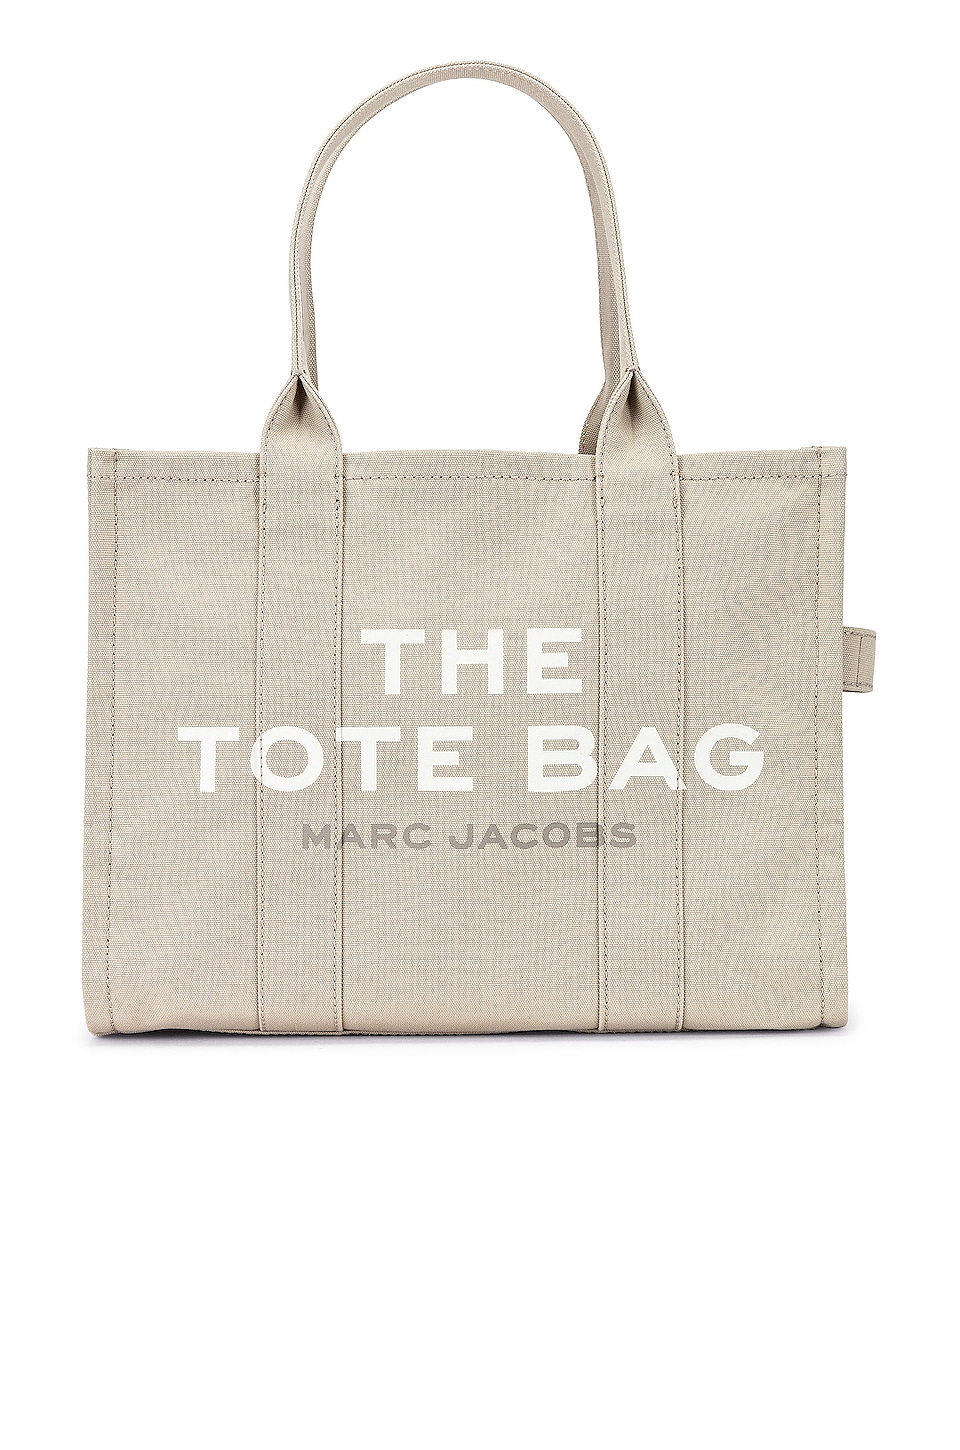 The Large canvas tote bag in brown - Marc Jacobs